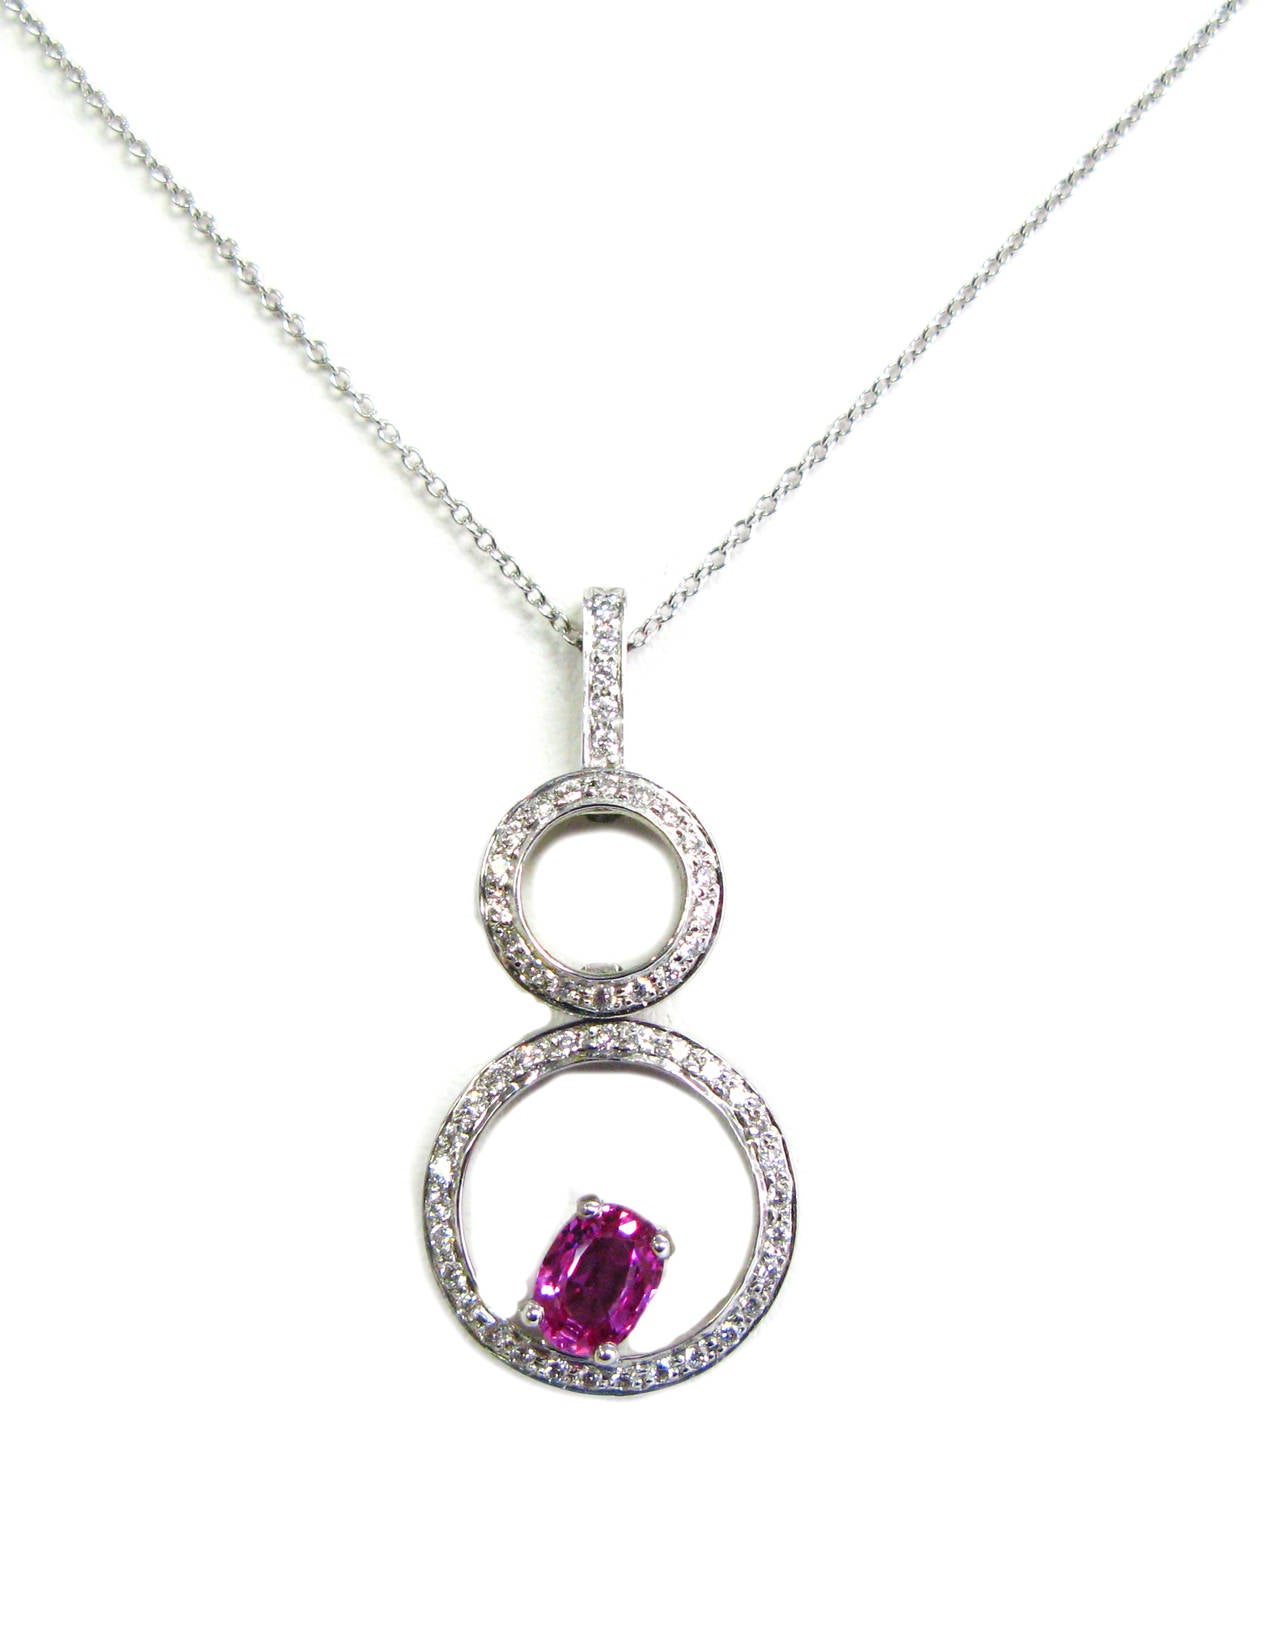 This fashionable 18kt white gold pendant is part of the Kurt Wayne collection. This piece features two pave set diamond circles with 0.40ctw round brilliants and an oval cut pink sapphire gemstone weighing 0.92cts suspended from an open link chain.